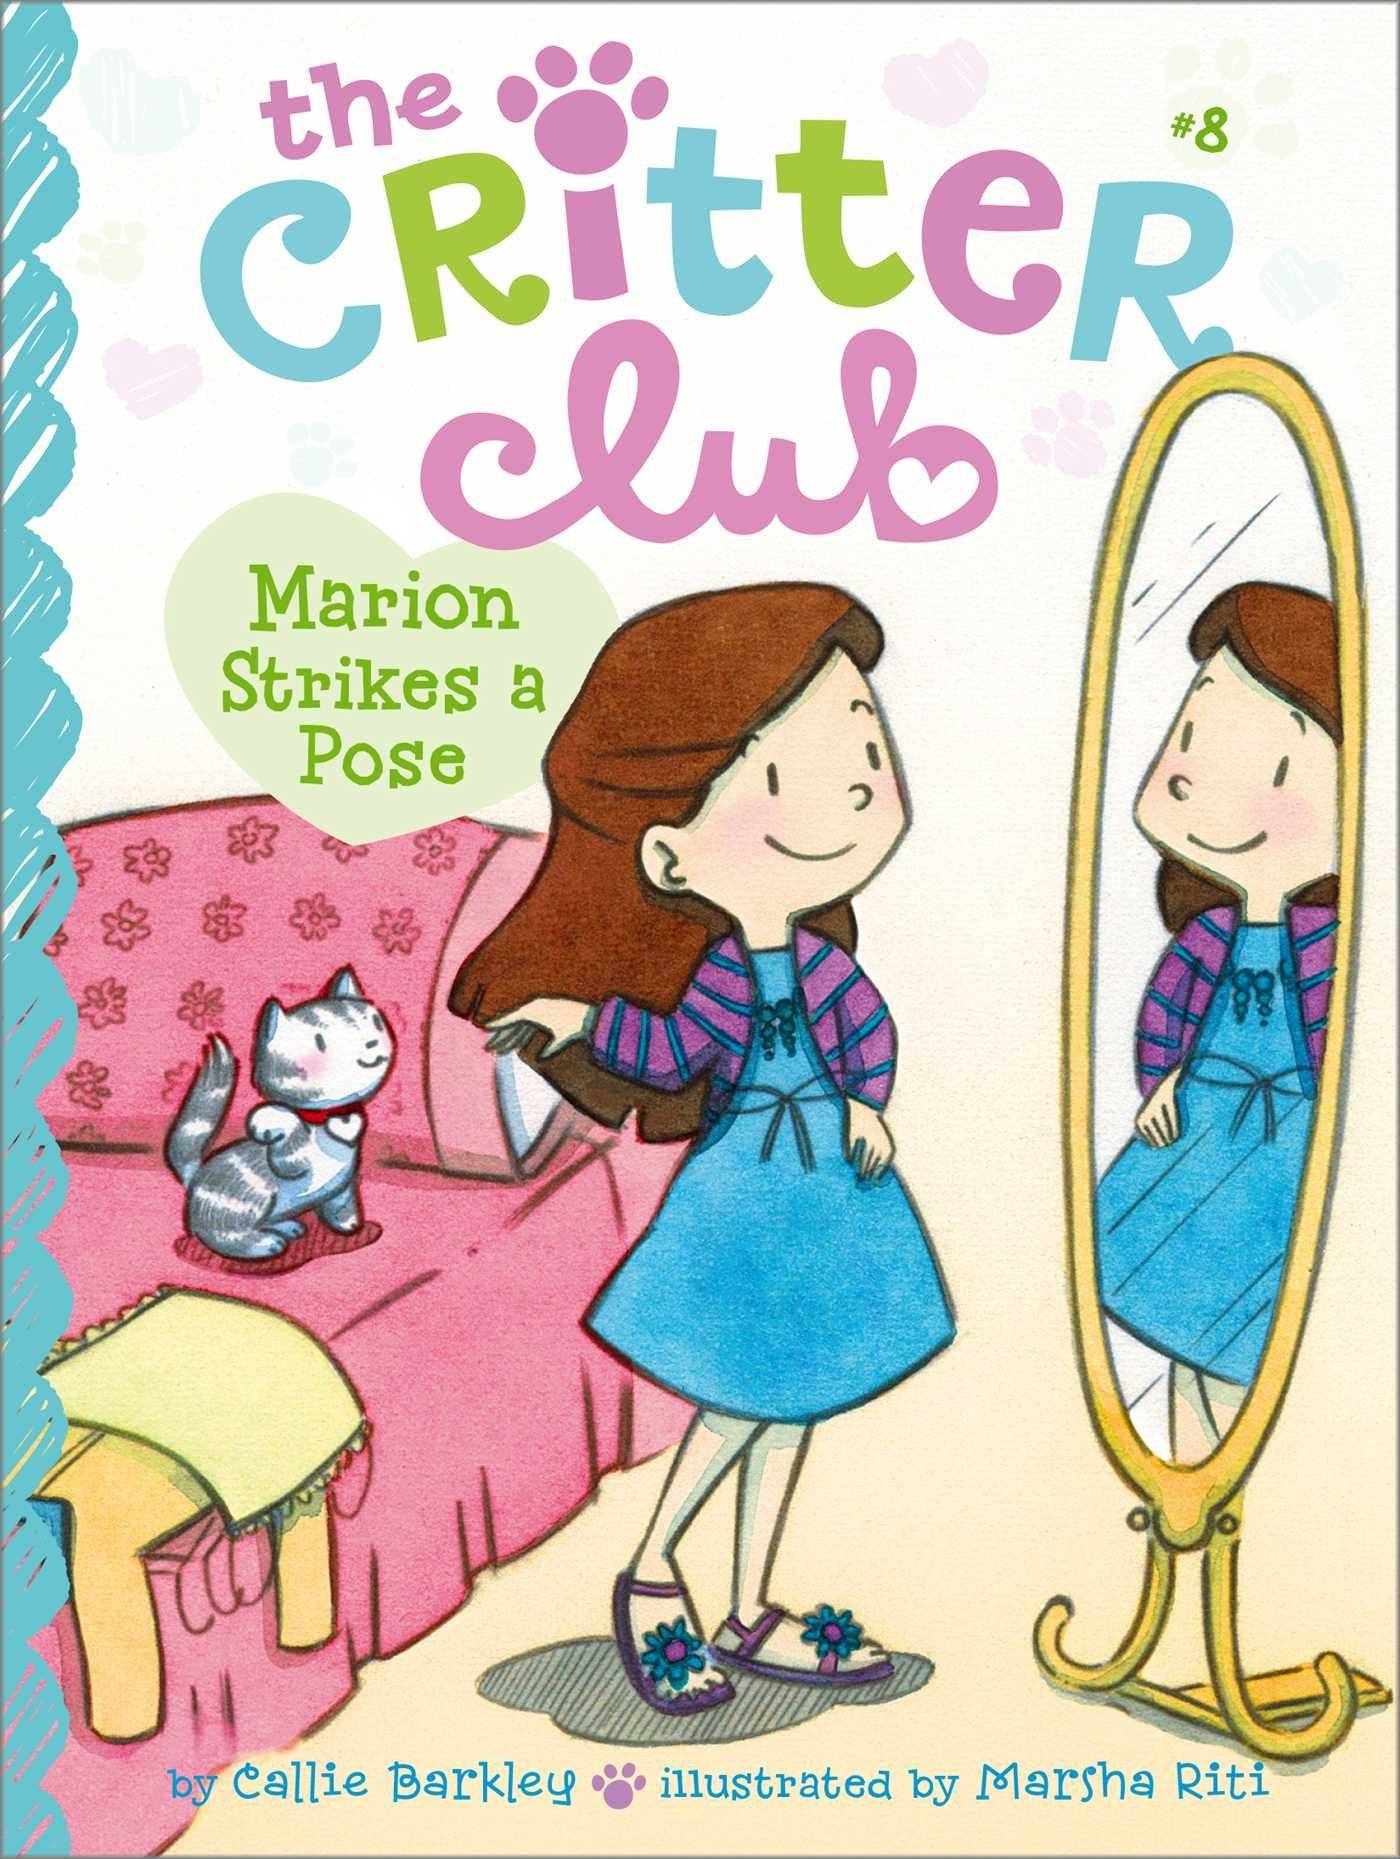 IMG : The Critter Club-Marion strikes a pose